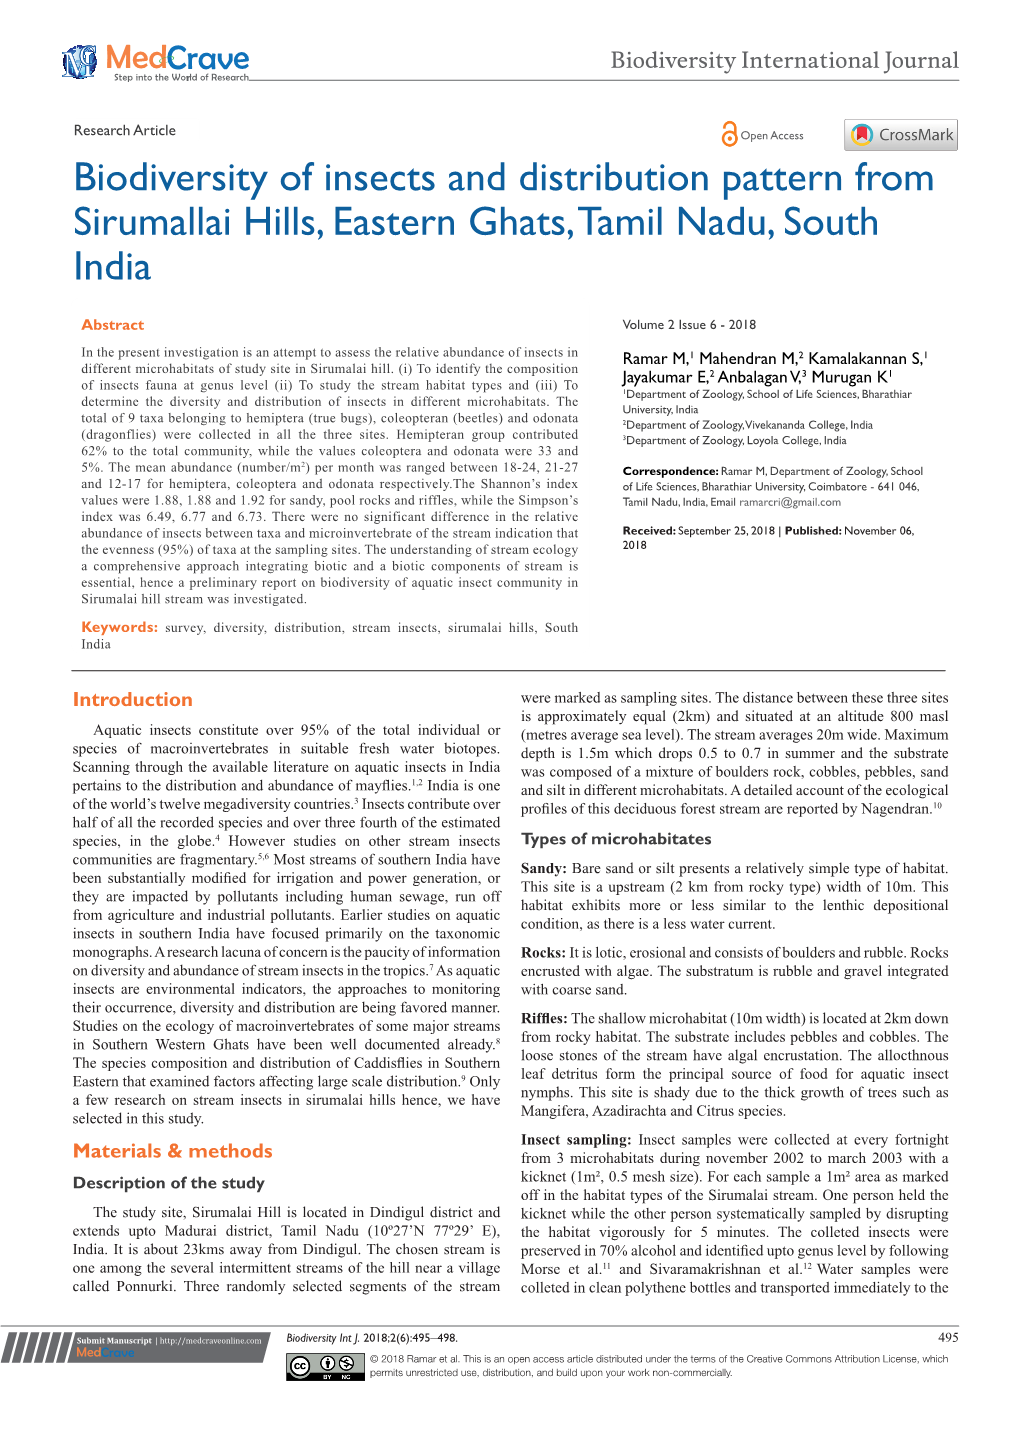 Biodiversity of Insects and Distribution Pattern from Sirumallai Hills, Eastern Ghats, Tamil Nadu, South India